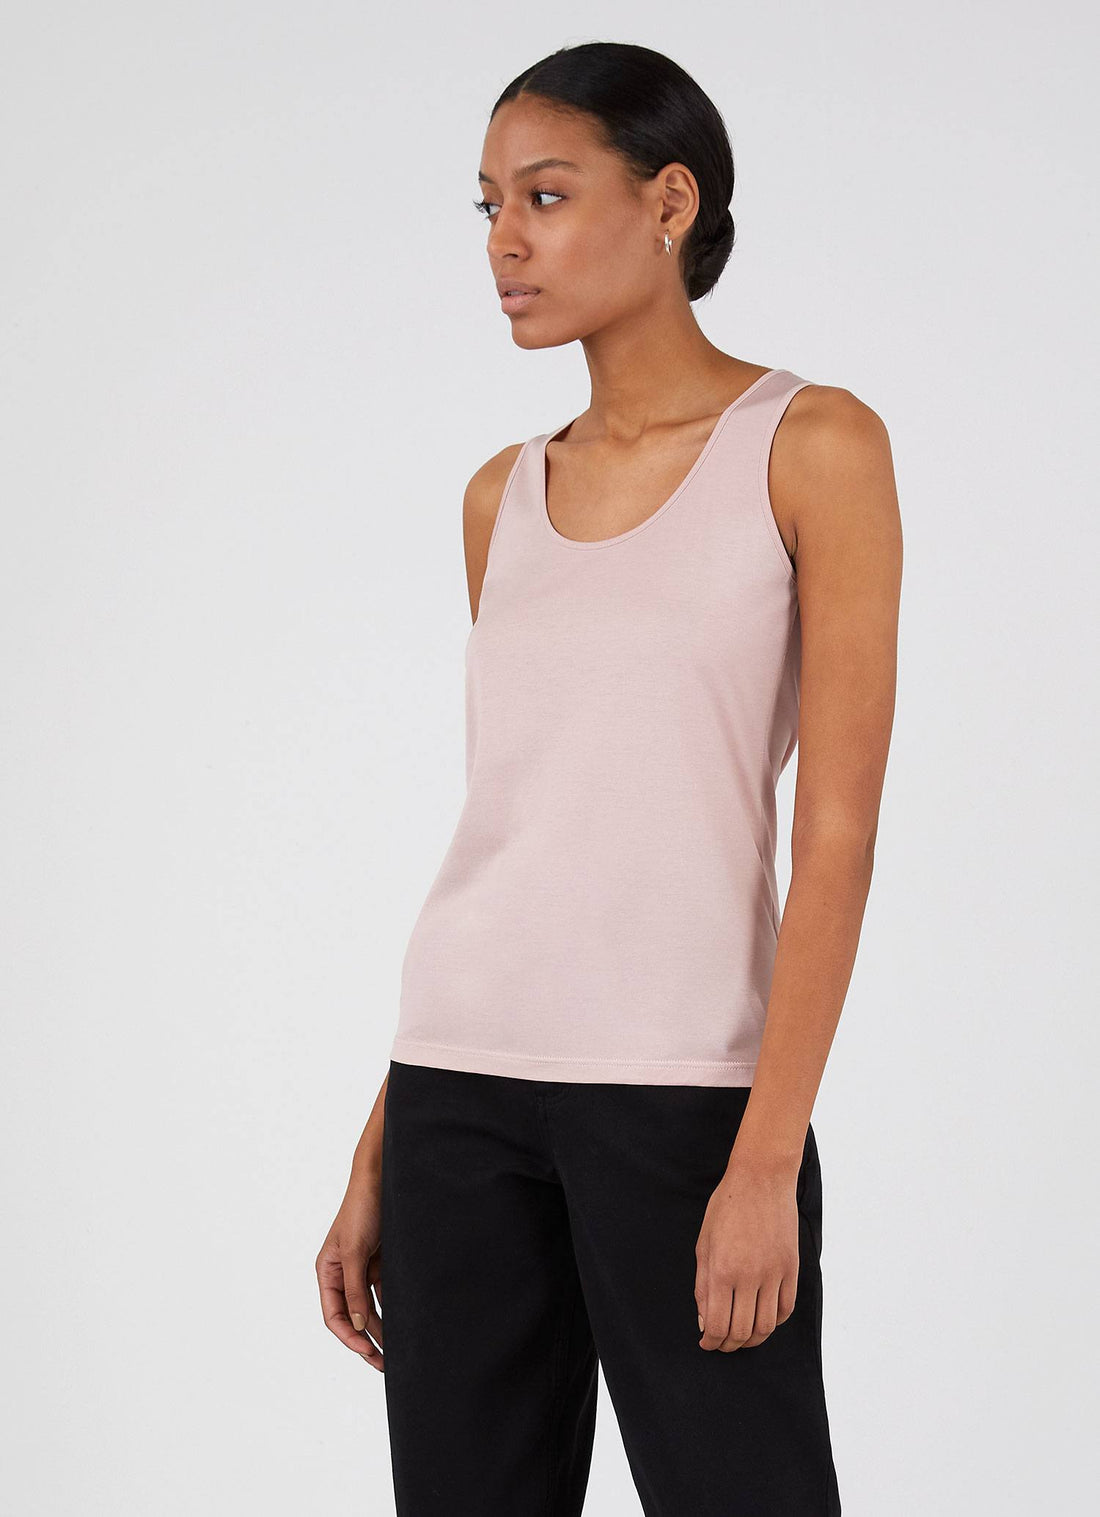 Women's Classic Vest in Shell Pink